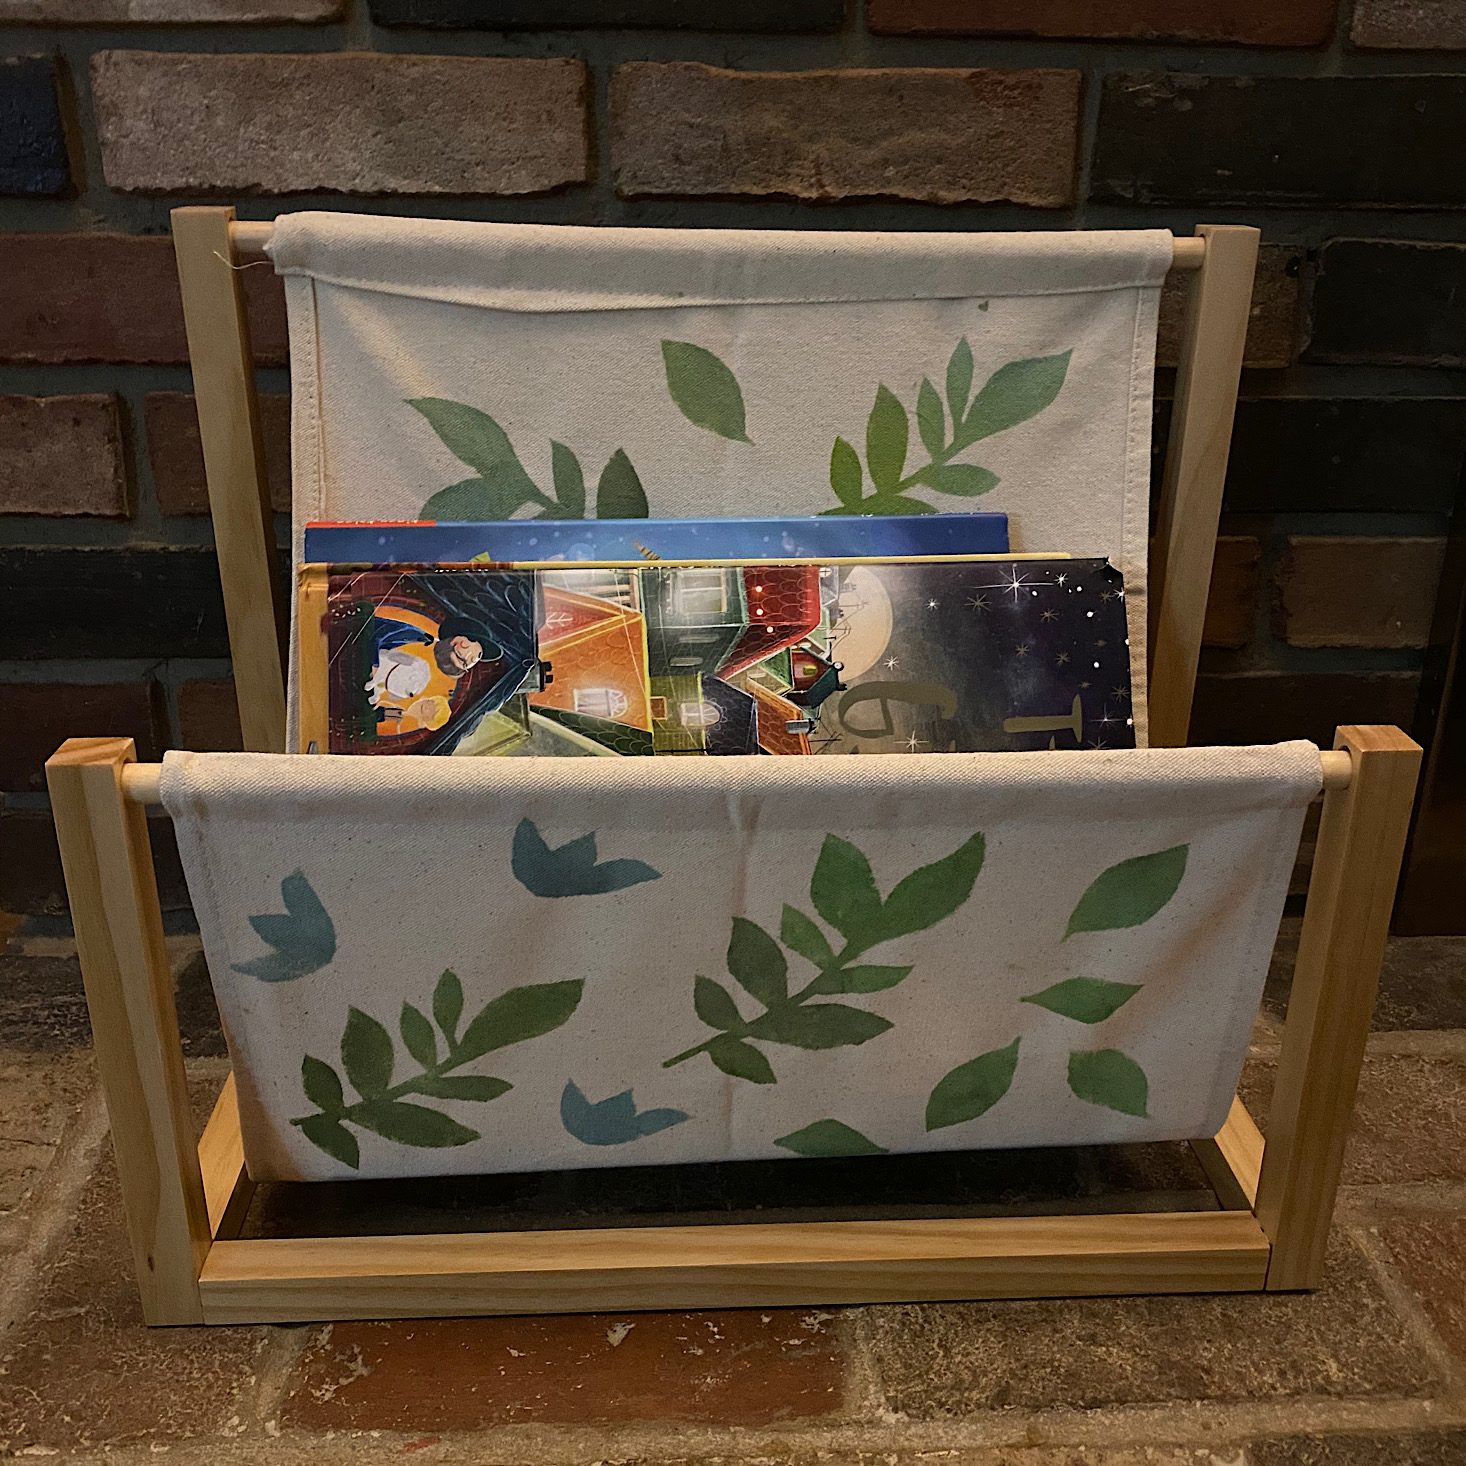 KiwiCo Maker Crate “Stenciled Book Holder” Review